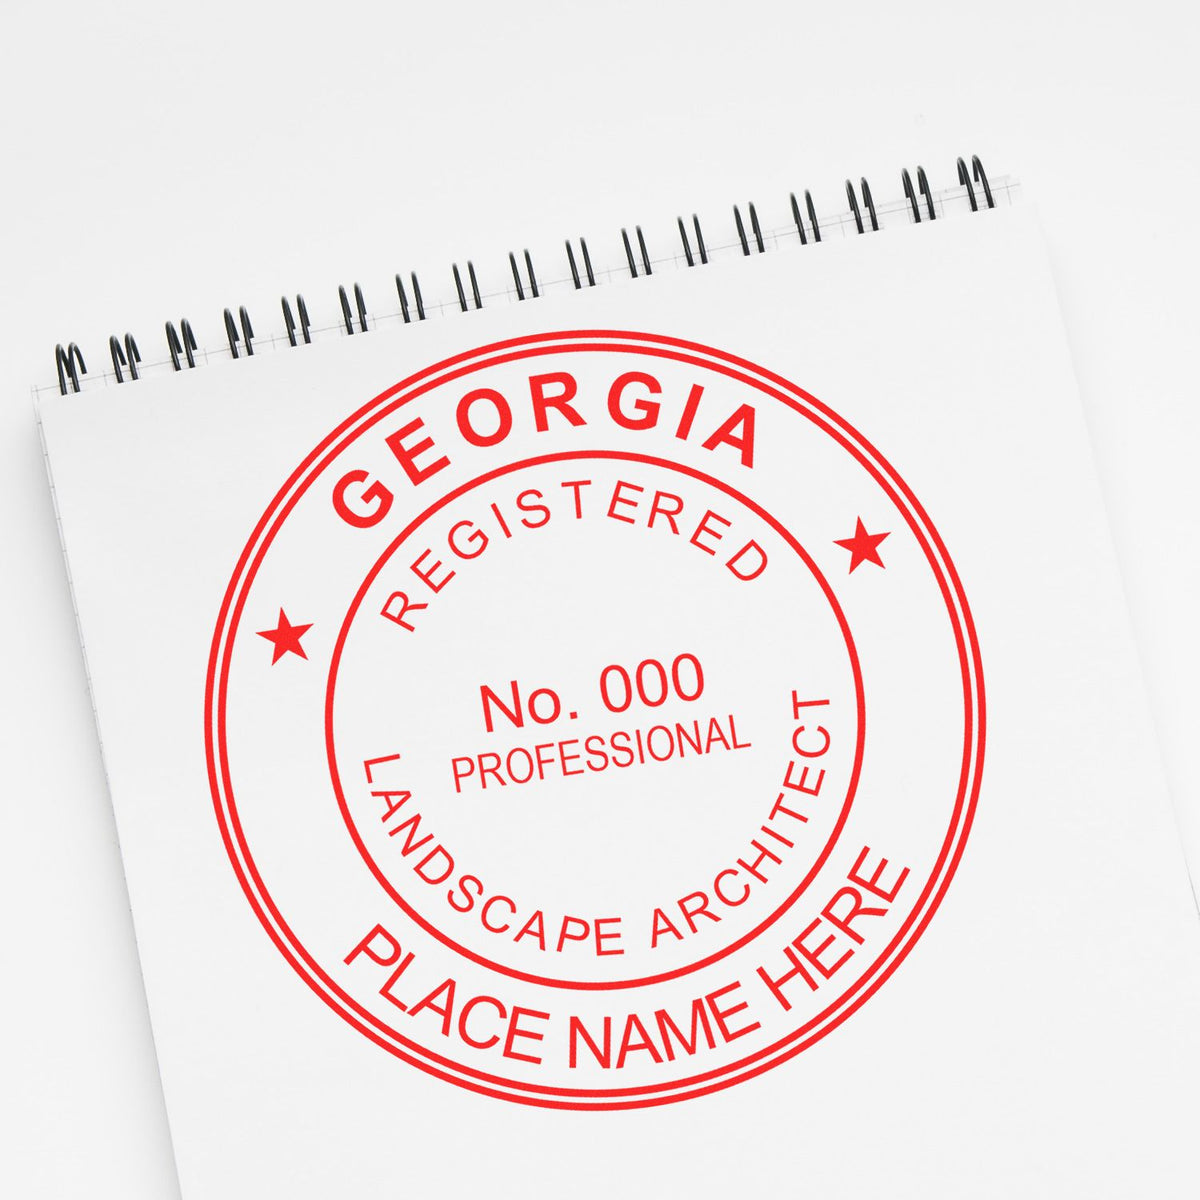 The Georgia Landscape Architectural Seal Stamp stamp impression comes to life with a crisp, detailed photo on paper - showcasing true professional quality.